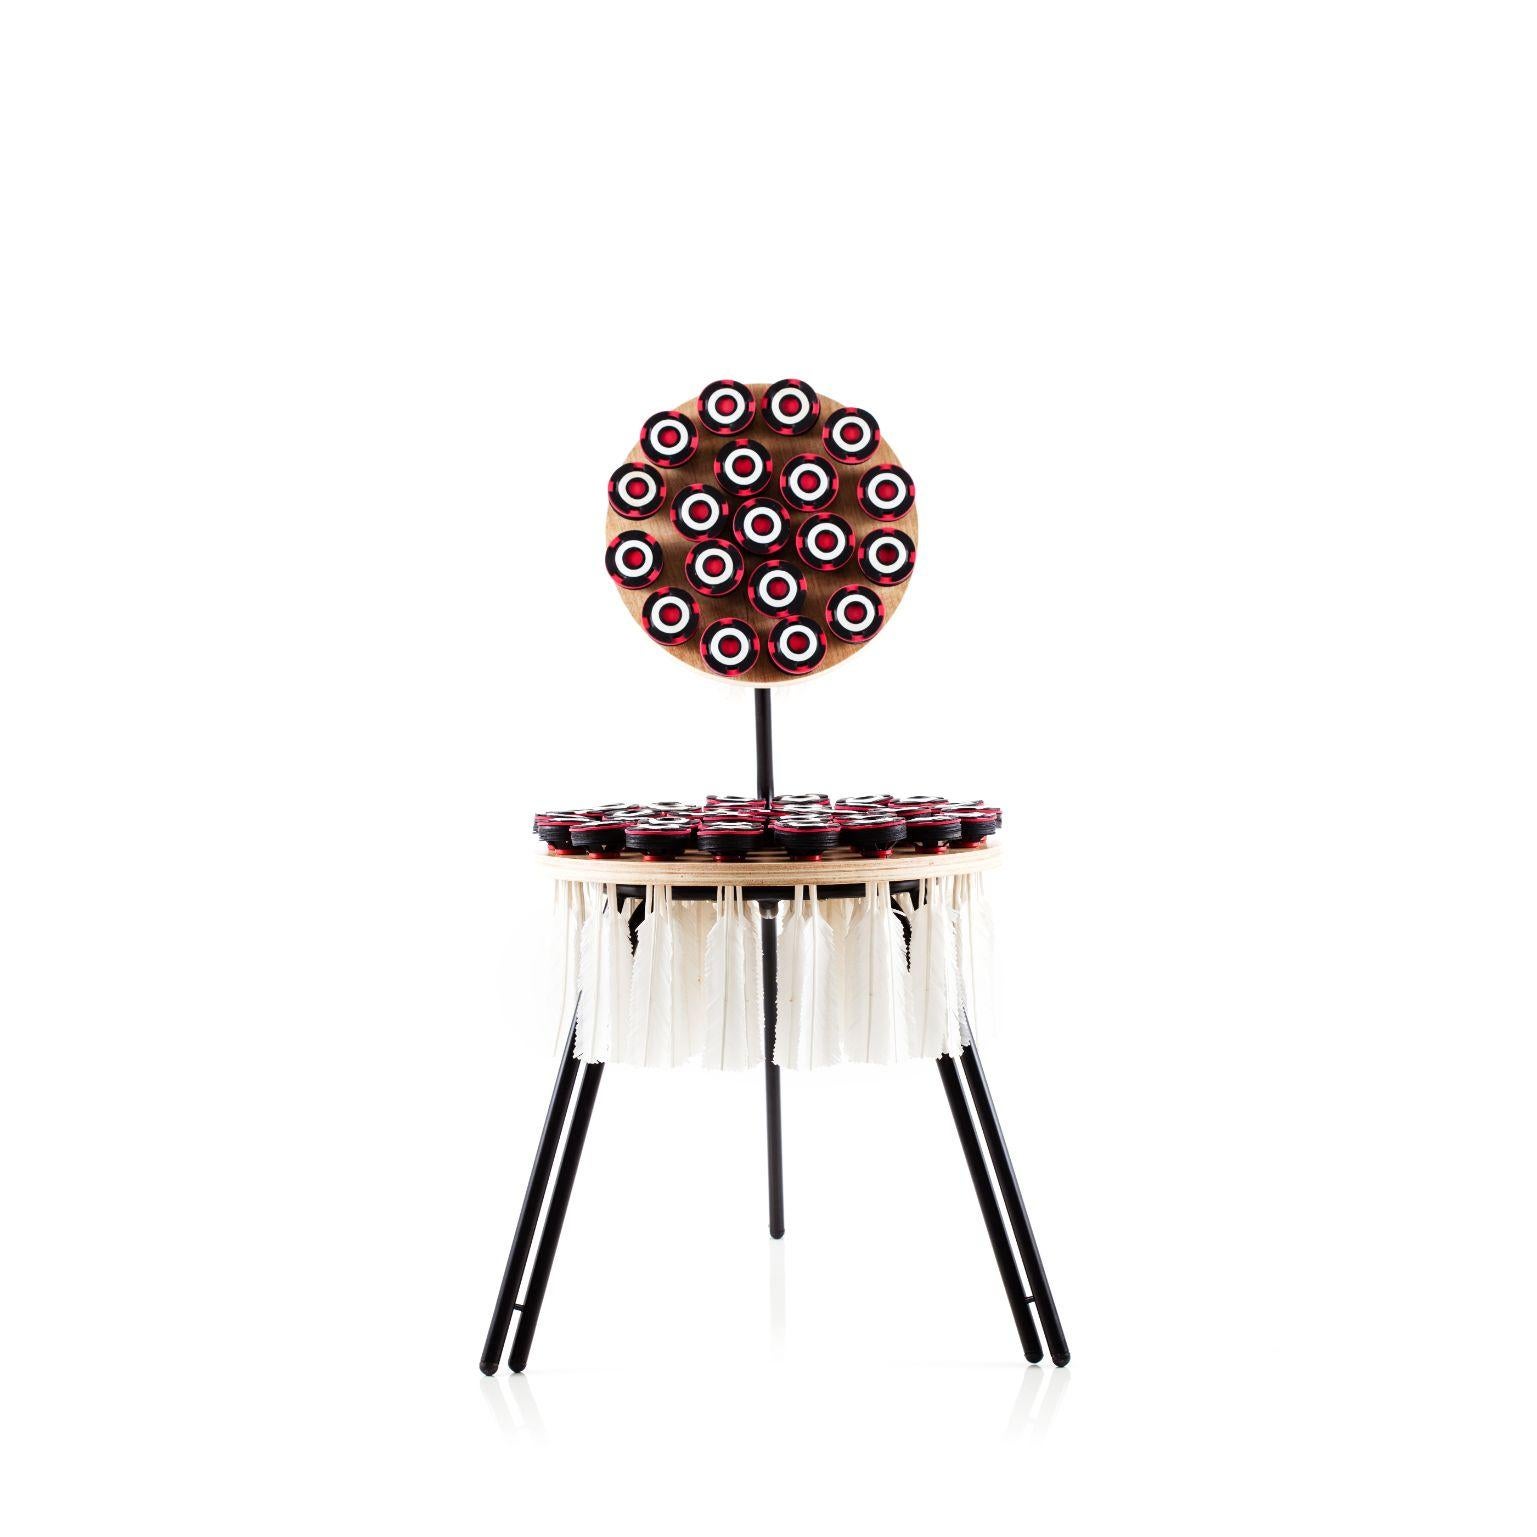 56 Petacas - Chair by Cultivado Em Casa
Dimensions: 50 x 75 x 83 cm
Materials: Carbon steel, plywood and shuttlecock.

The history of shuttlecock is genuinely Brazilian. Name given to both the sport and the artifact, shuttlecock has indigenous